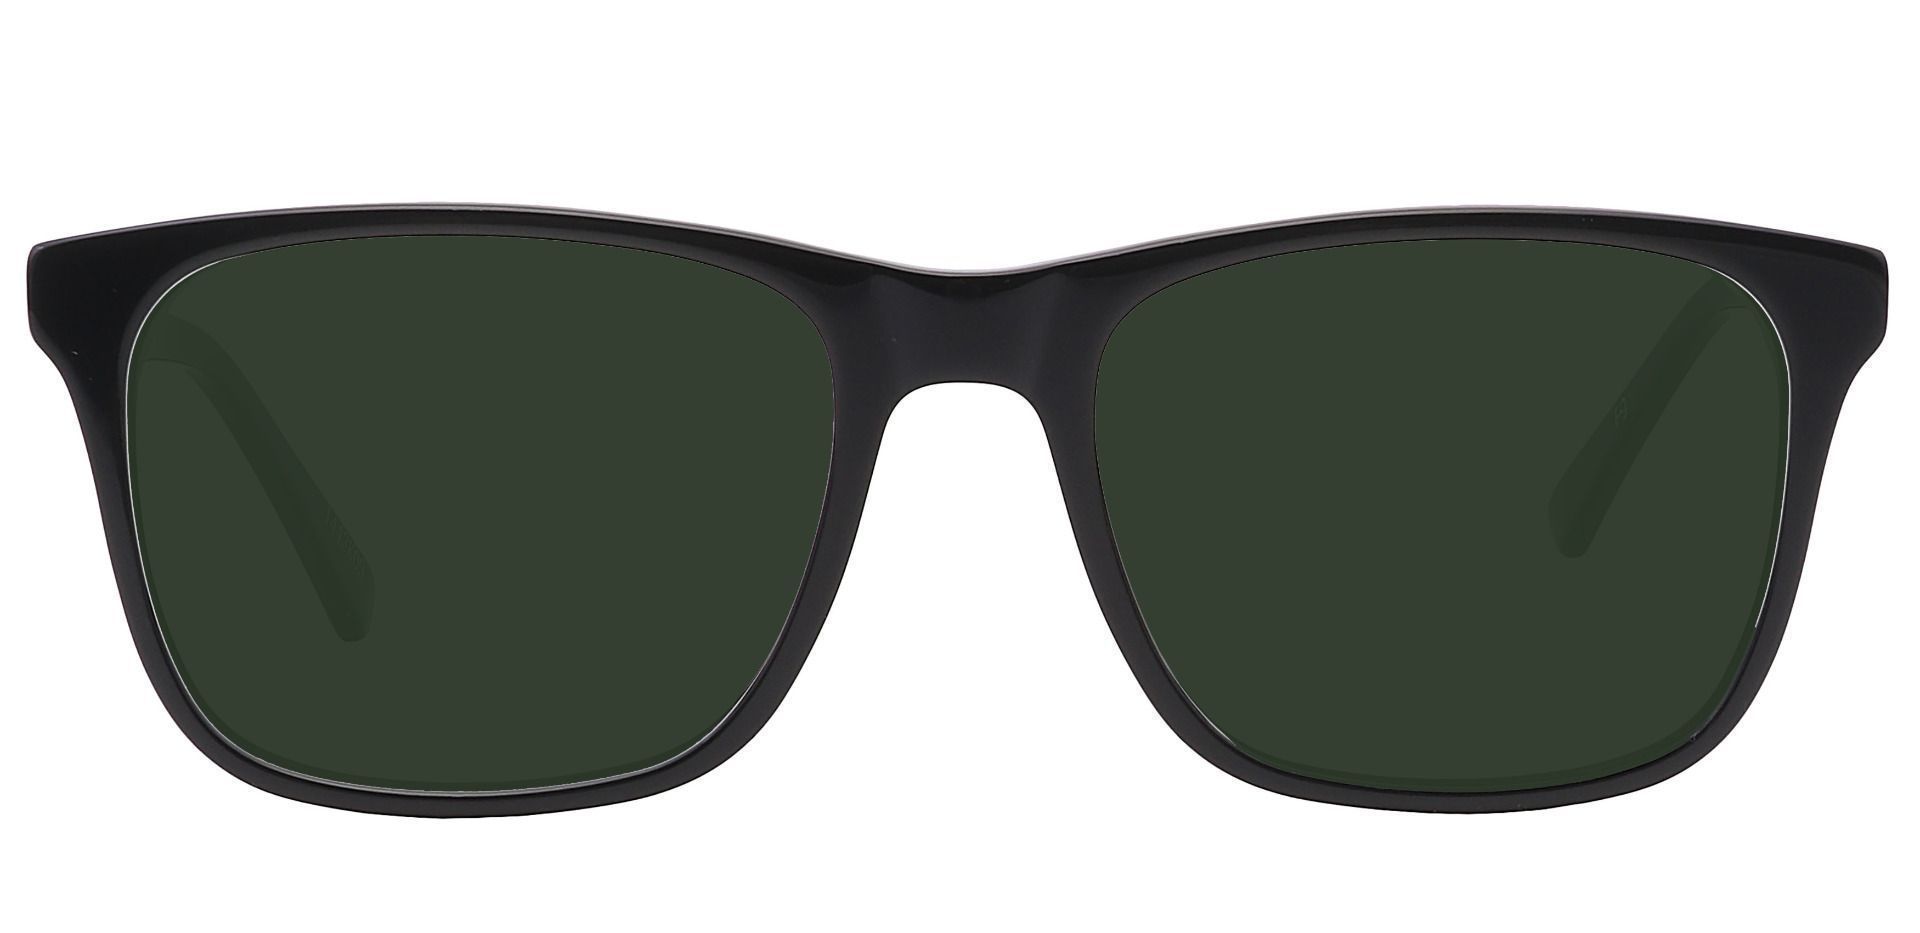 Cantina Square Reading Sunglasses - Black Frame With Green Lenses